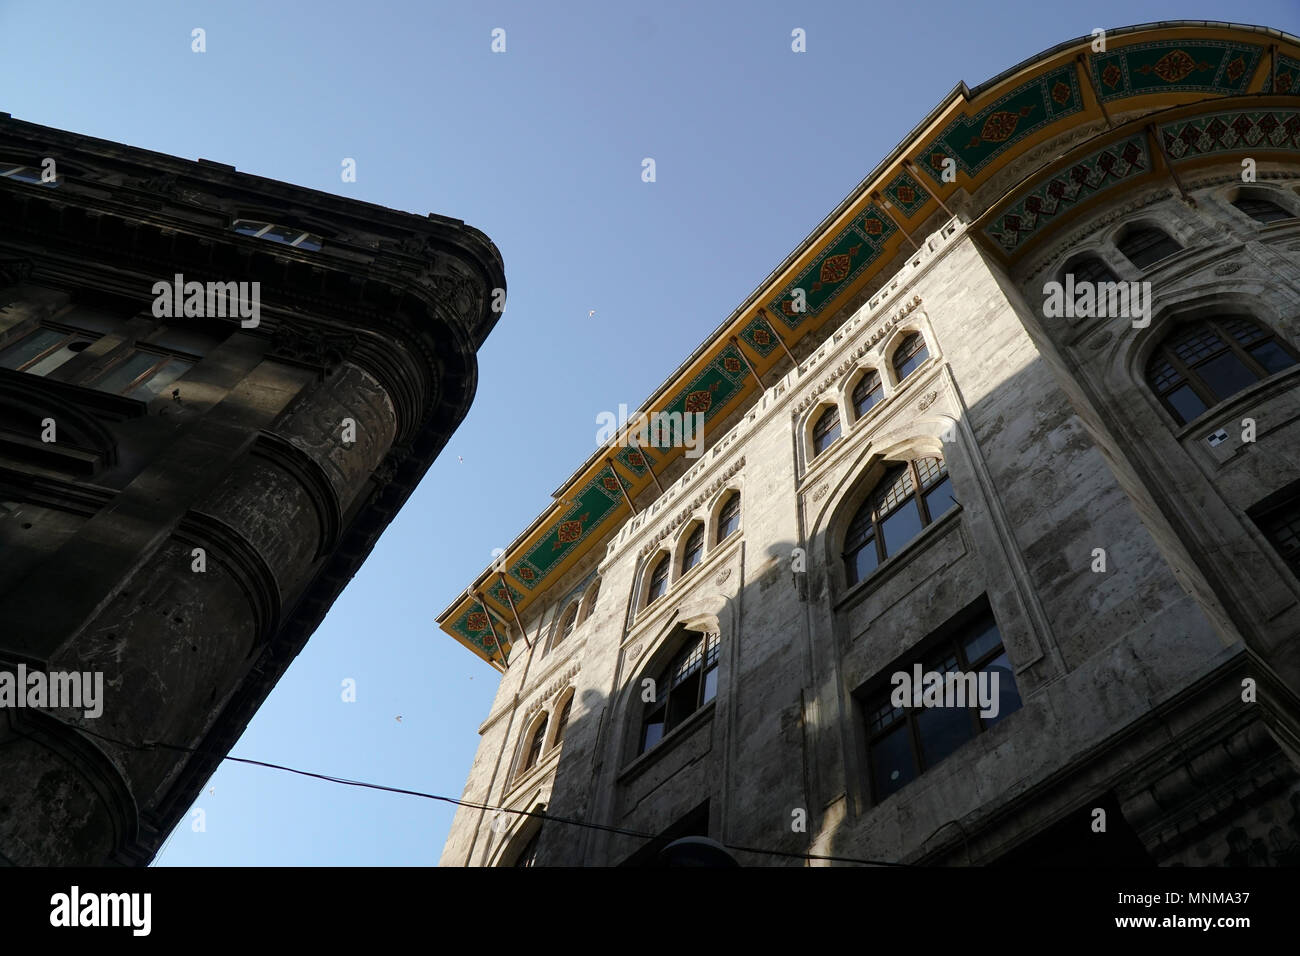 Istanbul, Turkey - May 17, 2018: Historical stone buildings are at Eminonu District at Istanbul with blue sky. Stock Photo